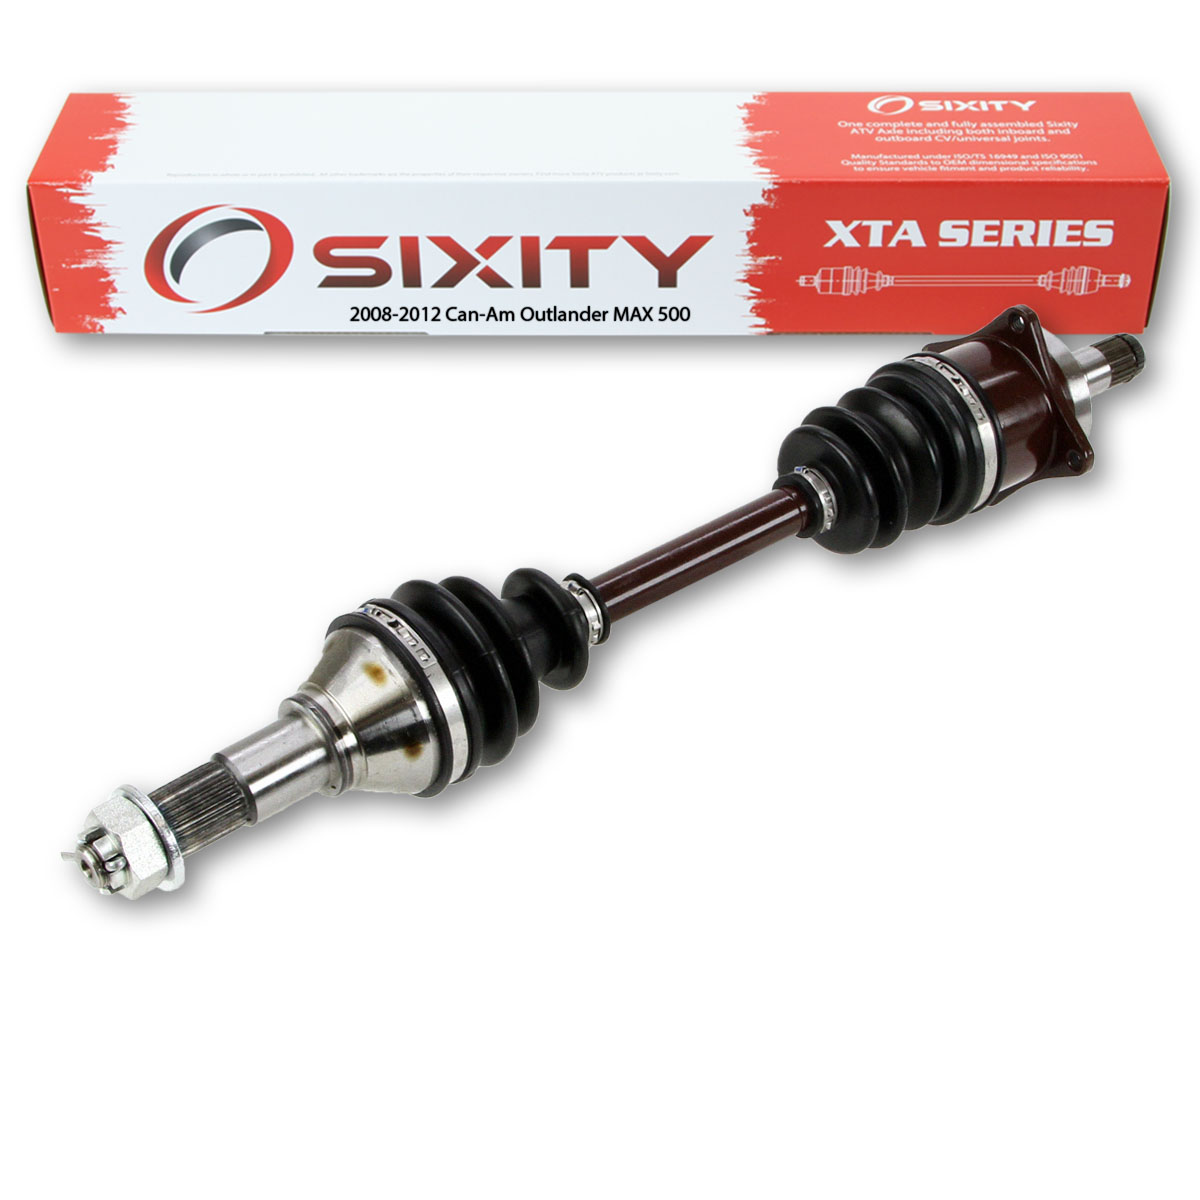 Sixity 2008-2012 Can-Am Outlander MAX 500 4X4 Front Left XTA ATV Axle - 2011 2010 2009